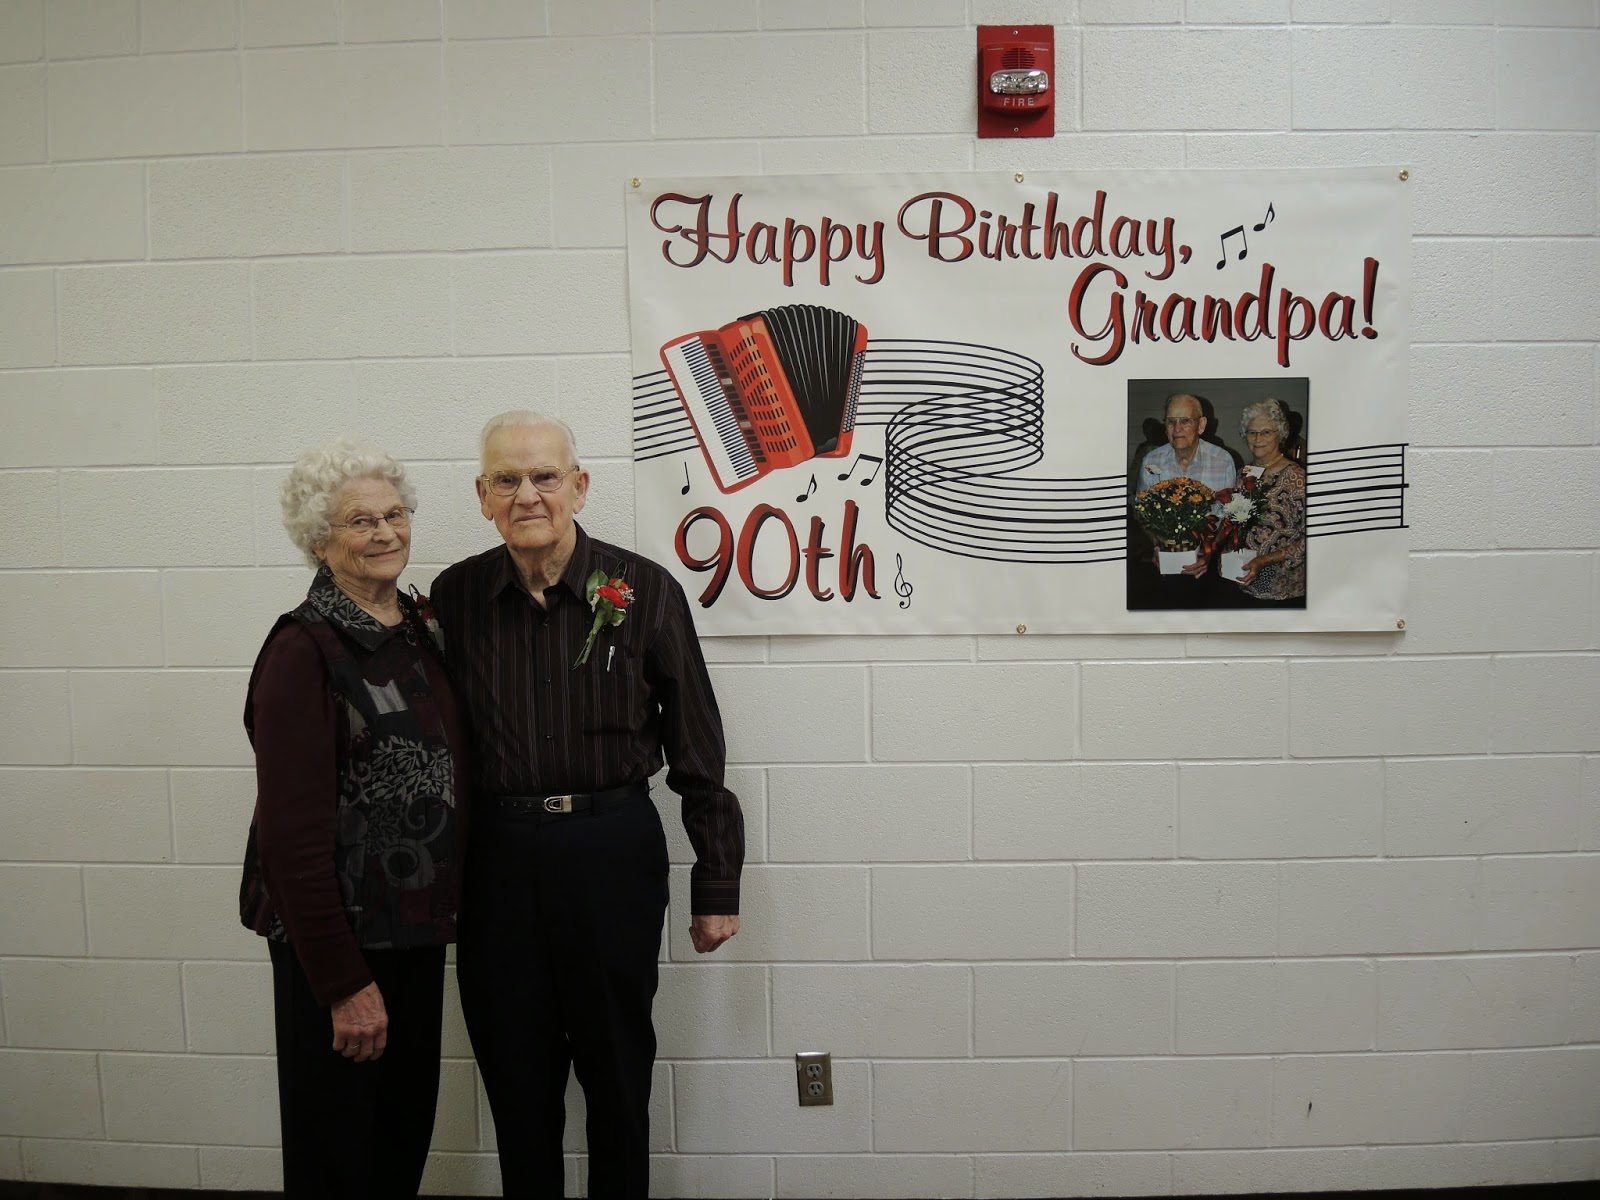 90th Birthday Banner - Printed by Banners.com